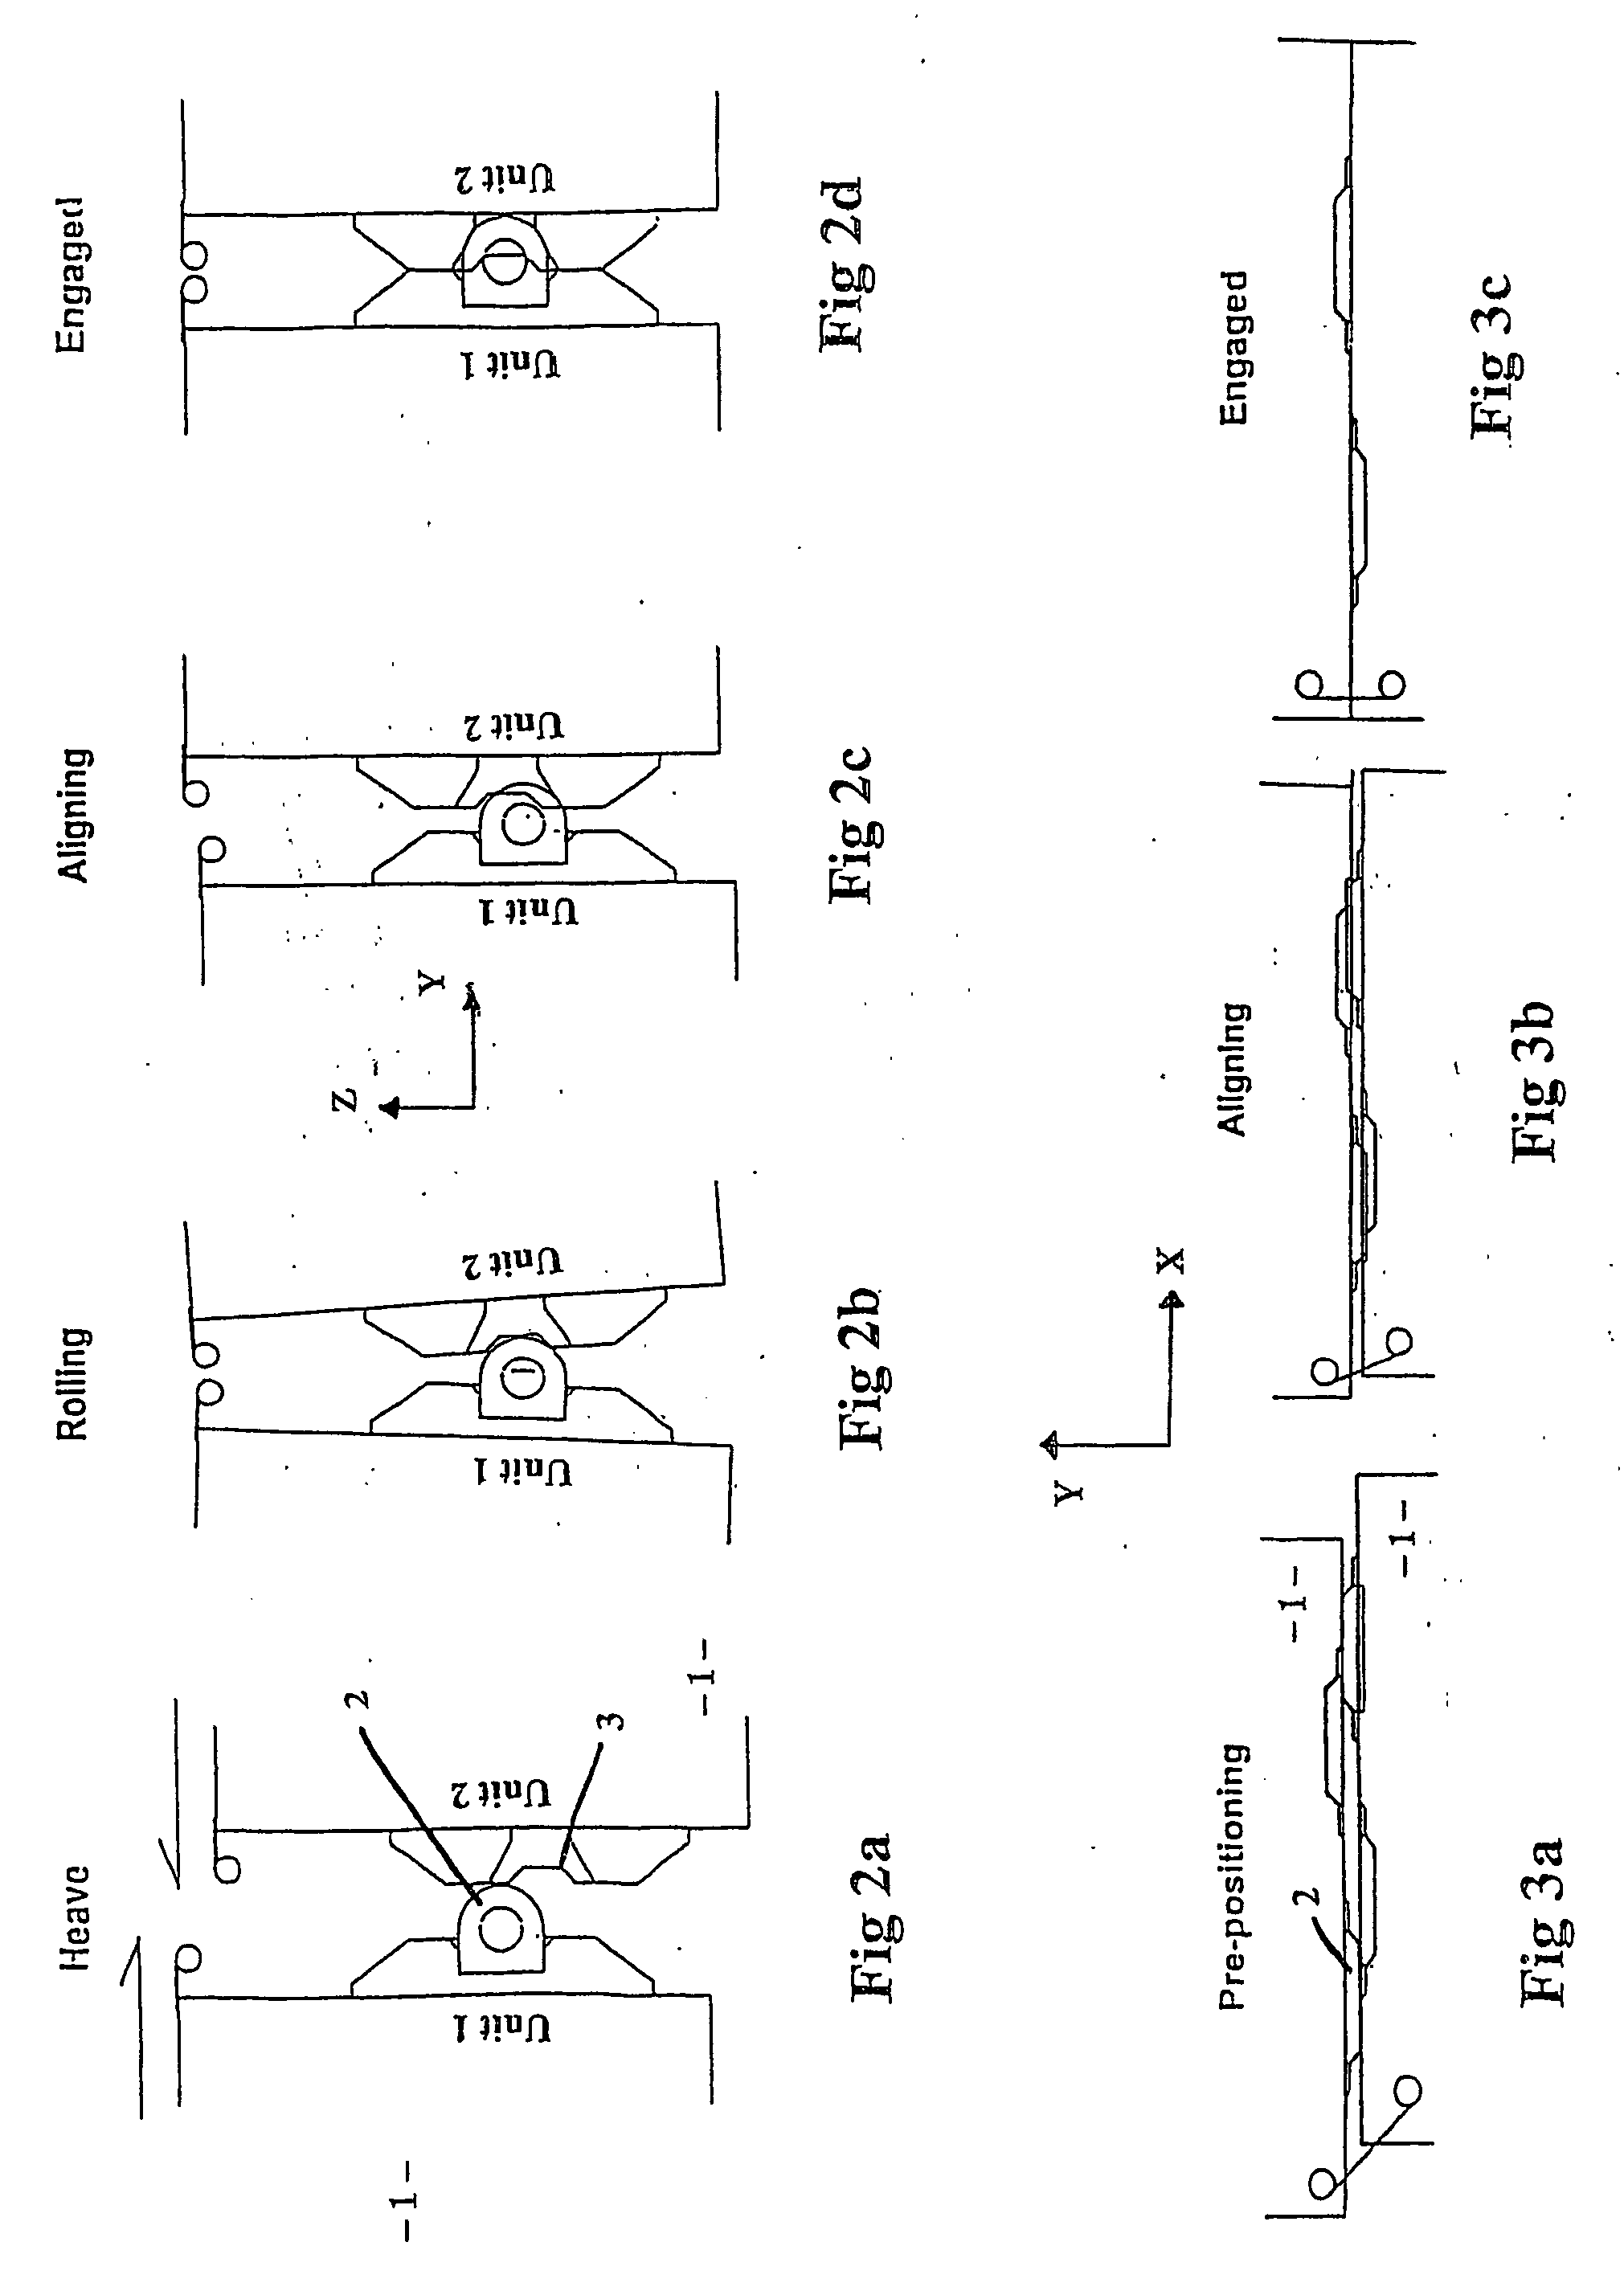 System for connecting buoyant marine bodies